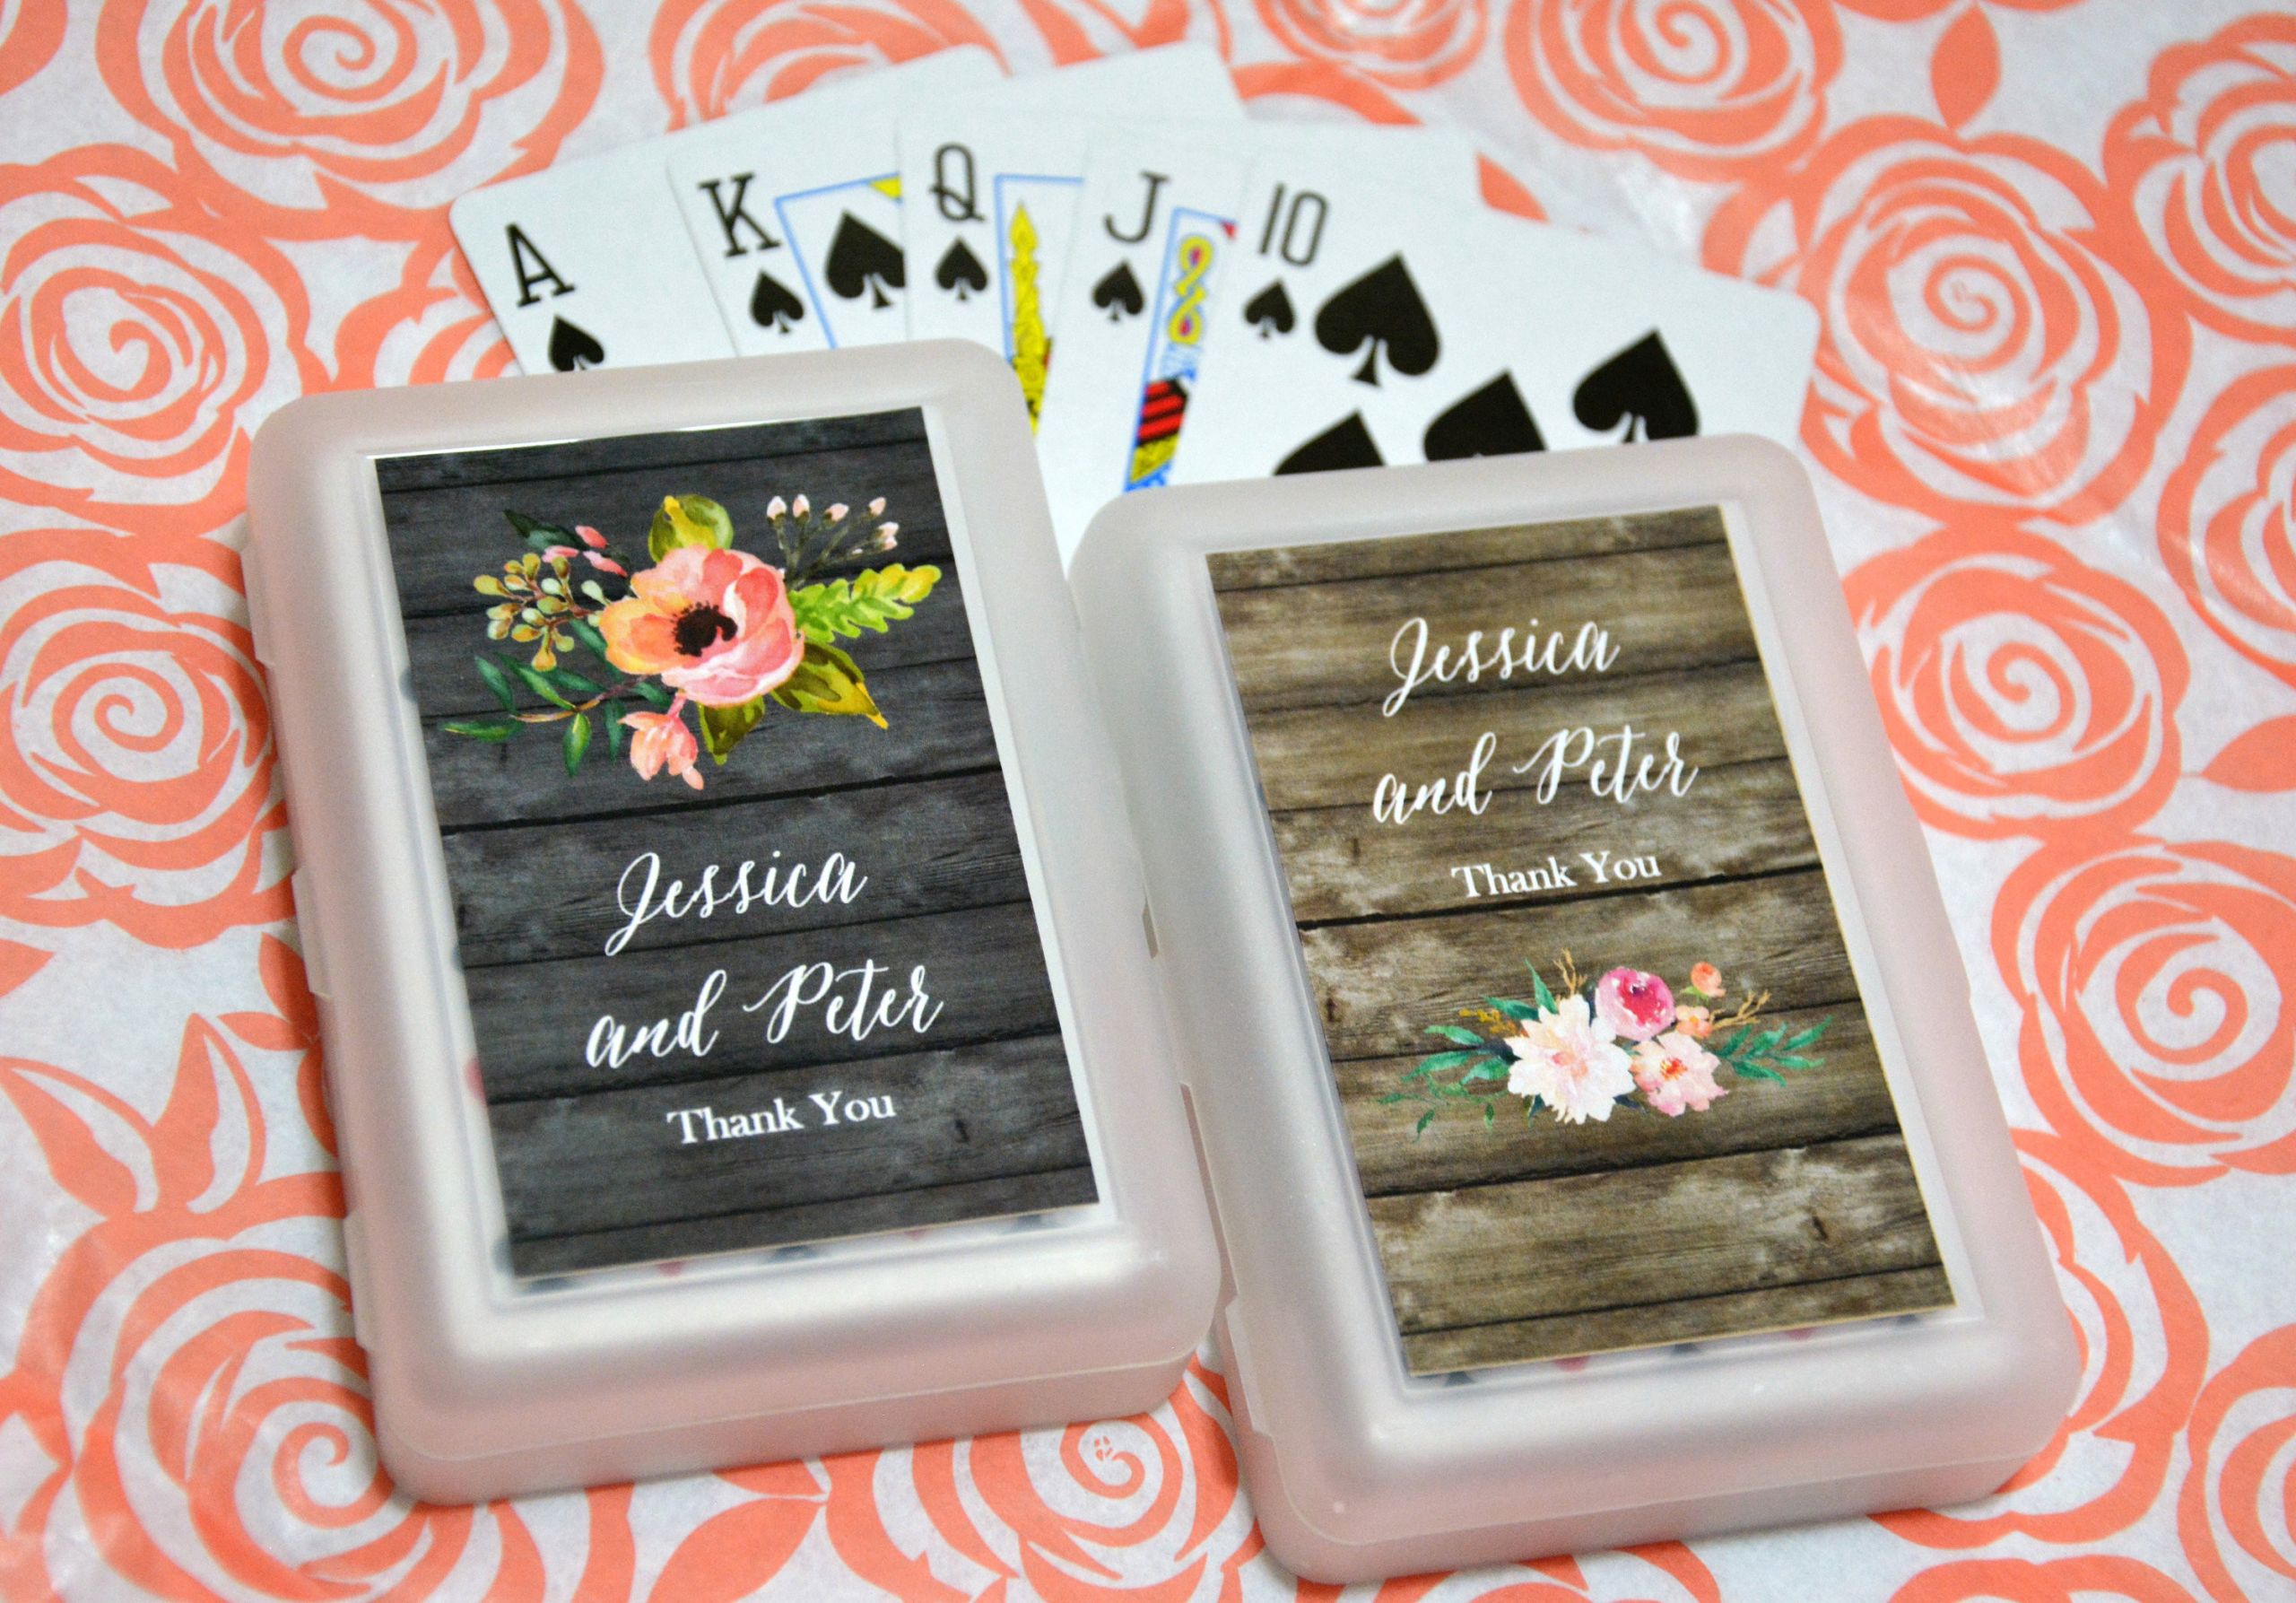 Personalized Playing Cards Wedding Favors
 50 Decks Personalized Playing Cards Wedding Favor Floral